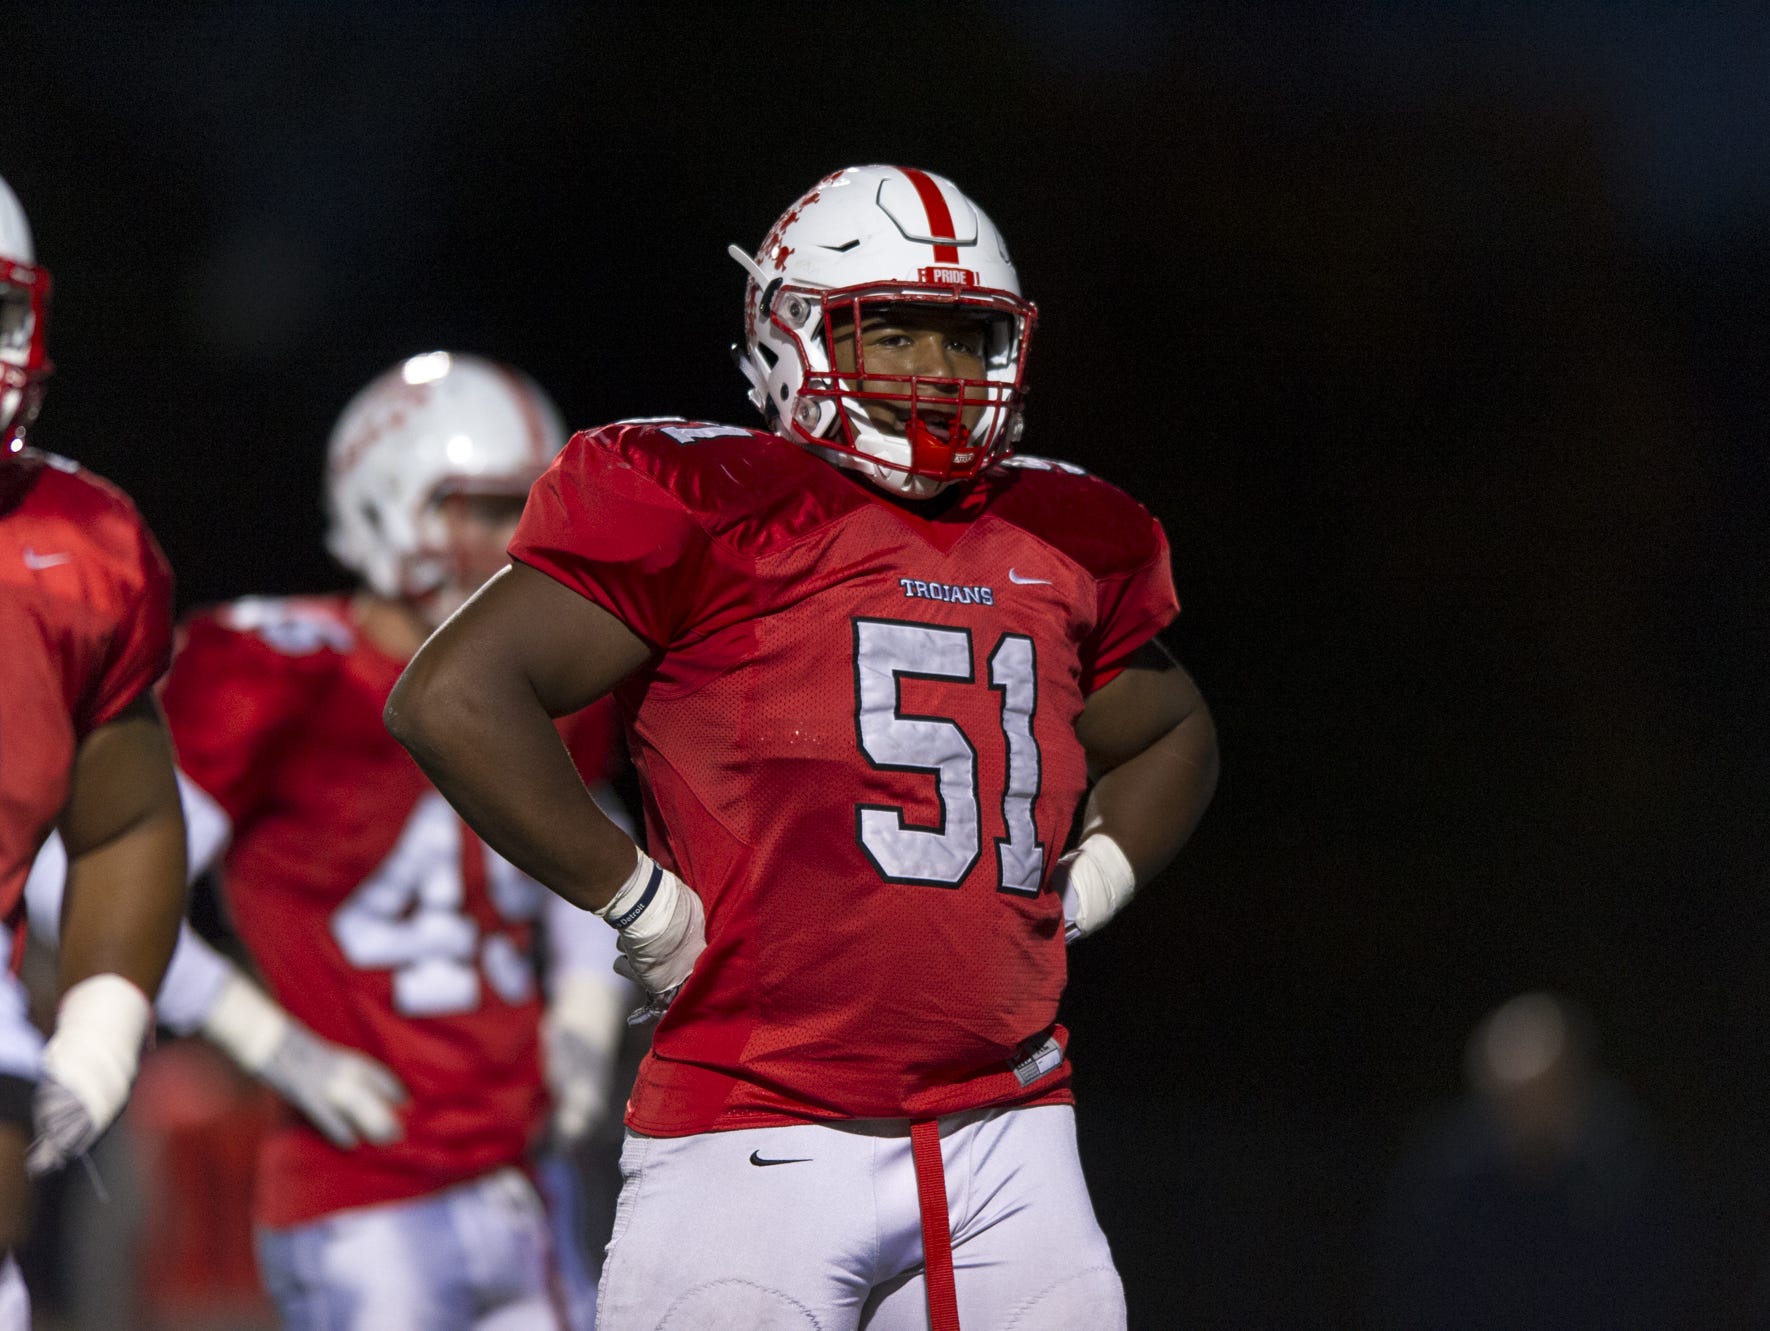 Center Grove's Jovan Swann was named Indiana's defensive player of the year.